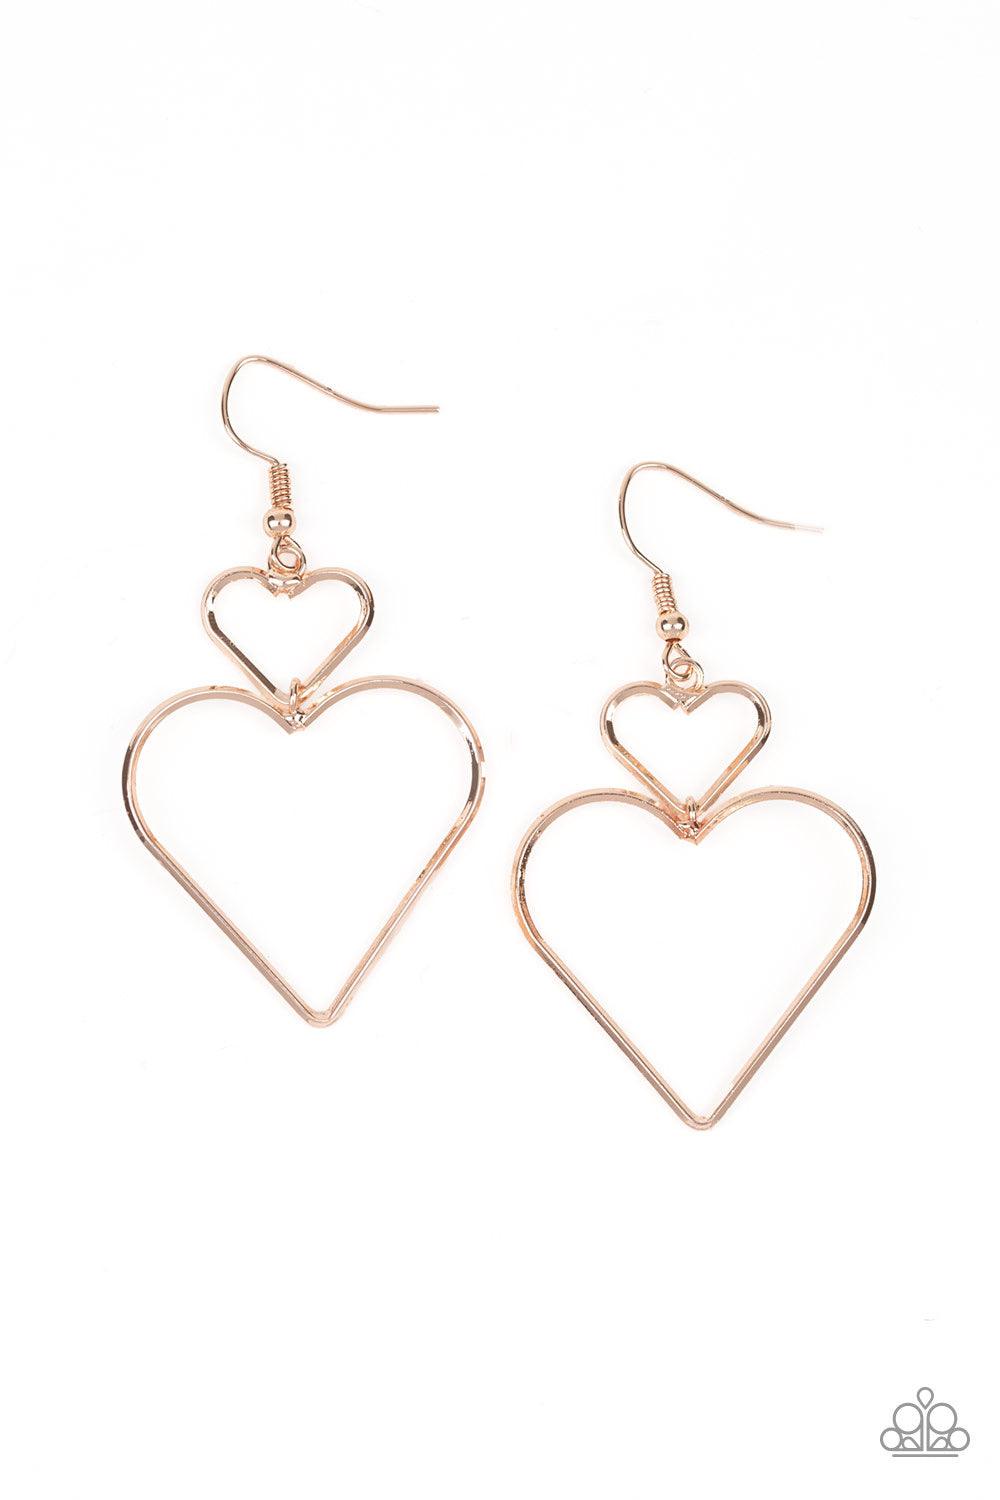 Paparazzi Accessories Heartbeat Harmony - Rose Gold A large rose gold heart silhouette swings from the bottom of a dainty rose gold heart silhouette, creating a charming lure. Earring attaches to a standard fishhook fitting. Jewelry